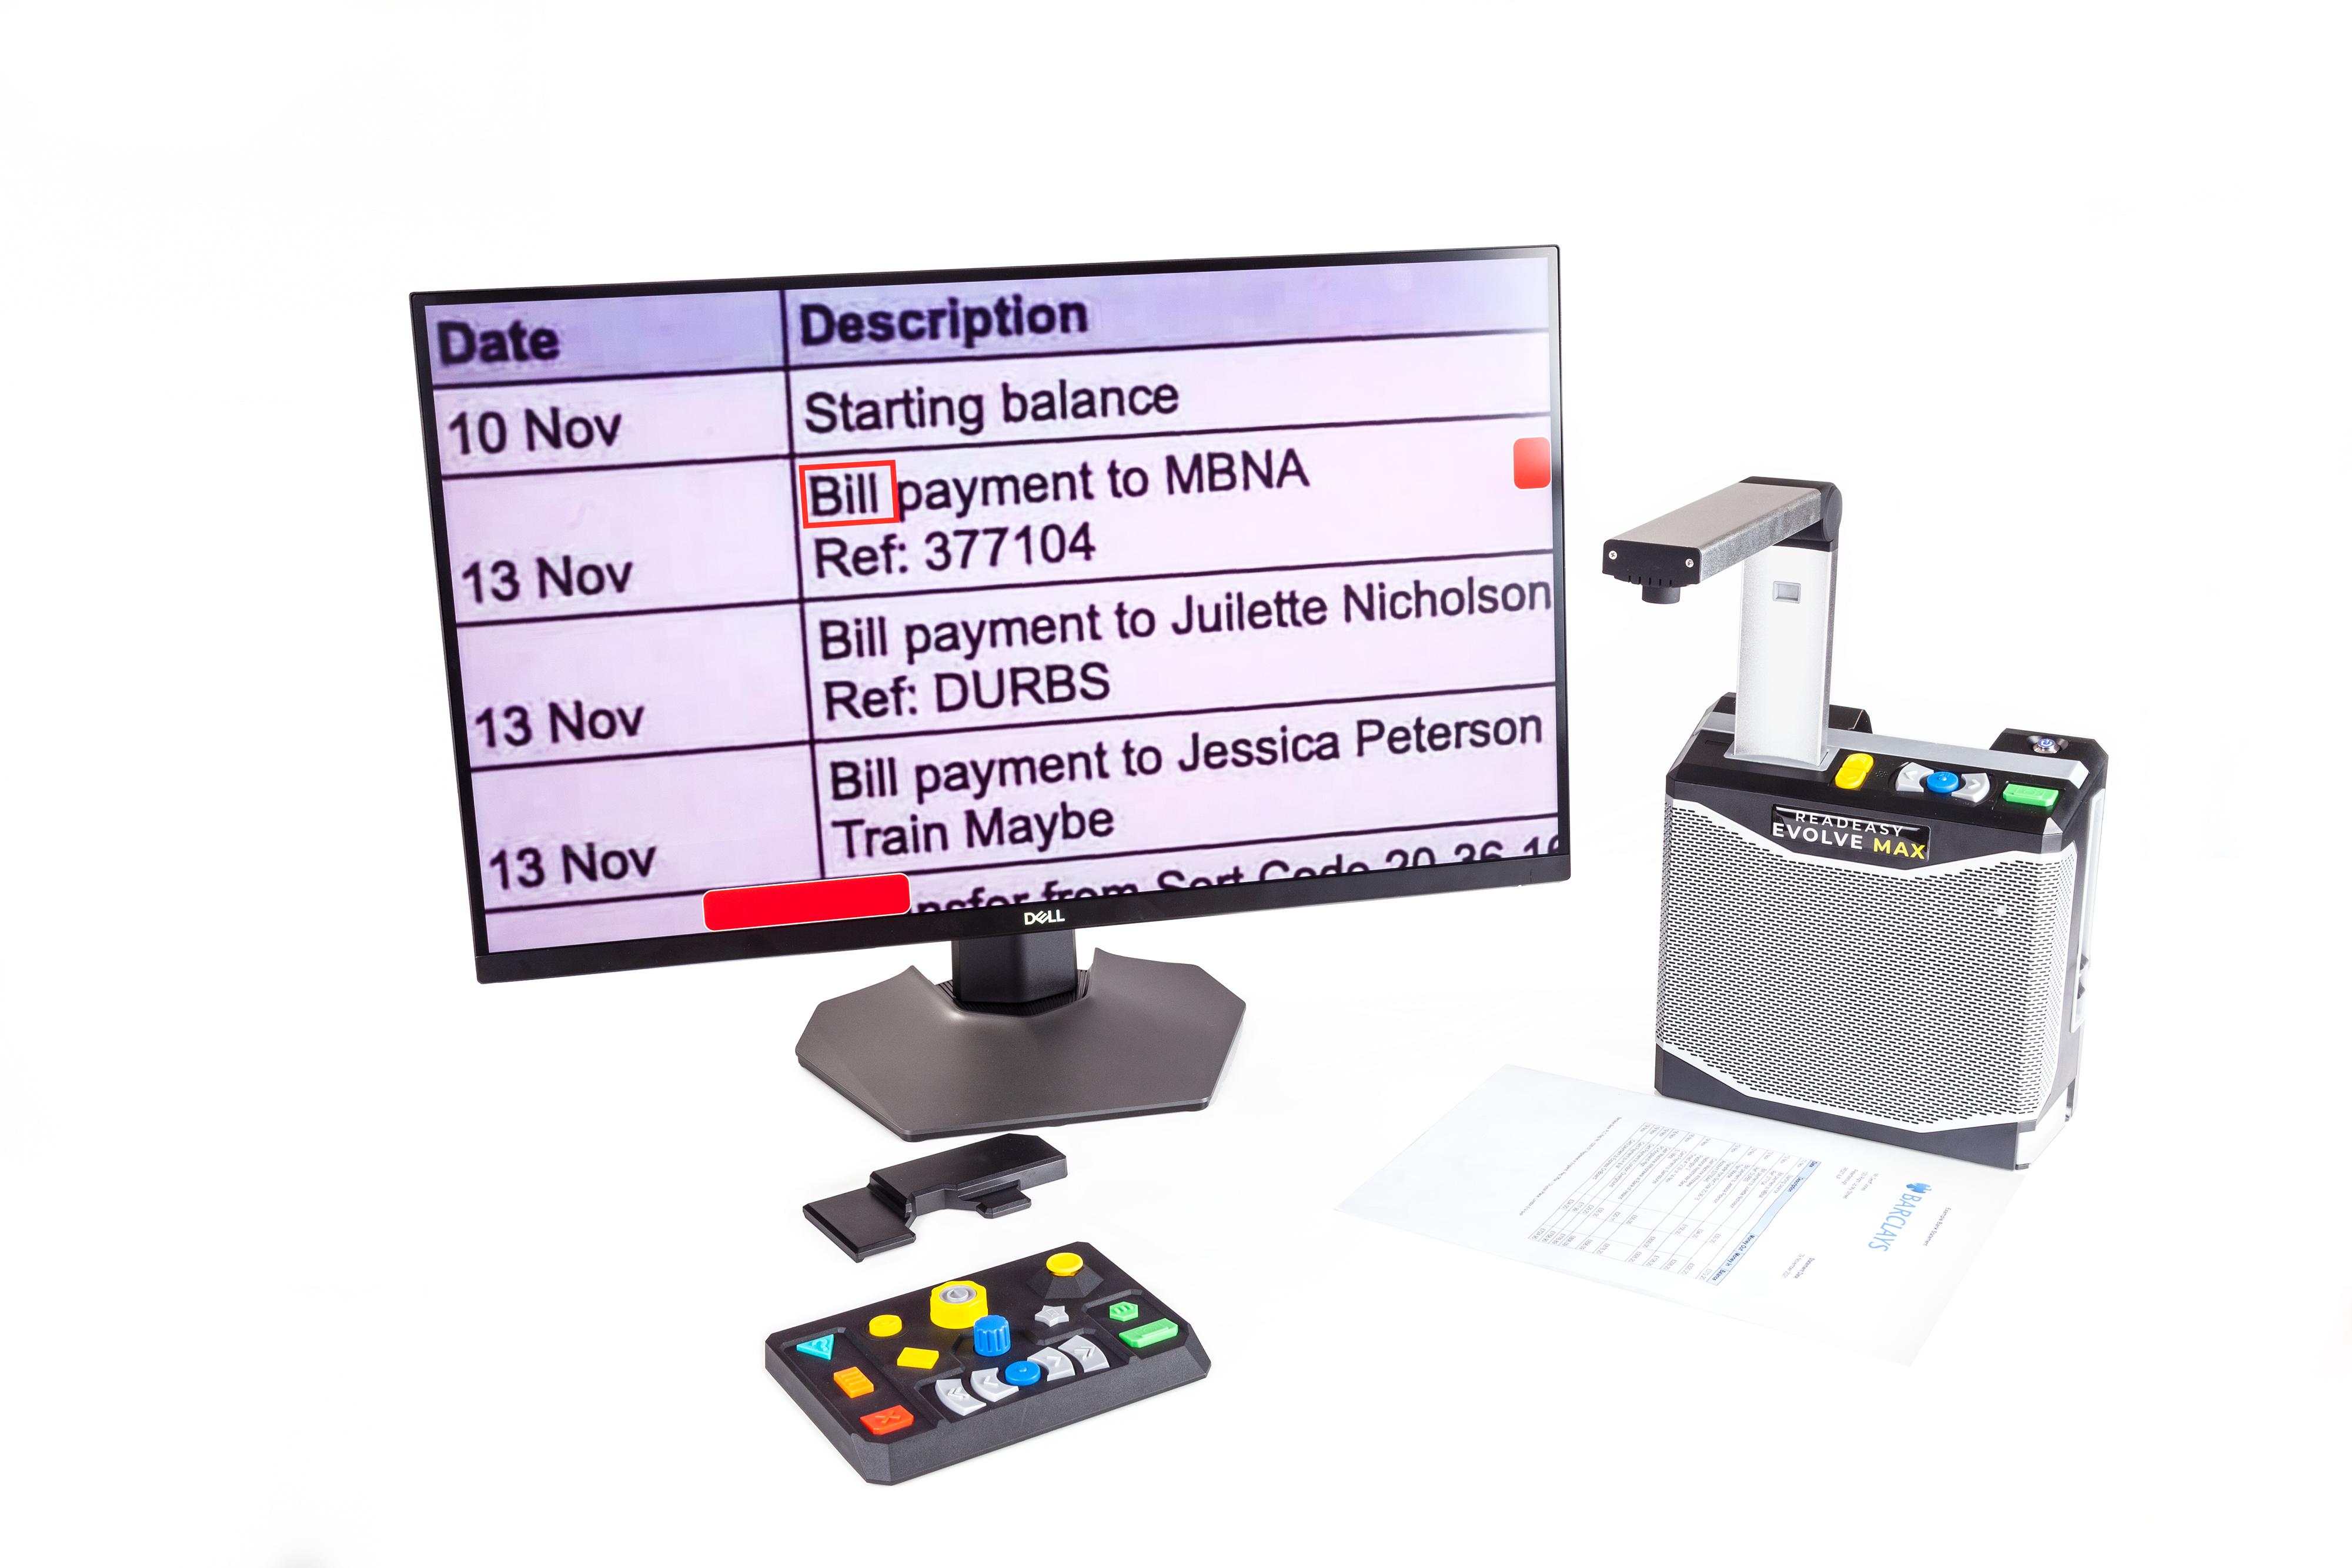 ReadEasy Evolve MAX connected to a screen in front of the screen is it's optional feature pack with it's guide cover removed. The ReadEasy Evolve MAX is capturing a bank statement, it's displaying the captured table information on the screen in it's true colour.